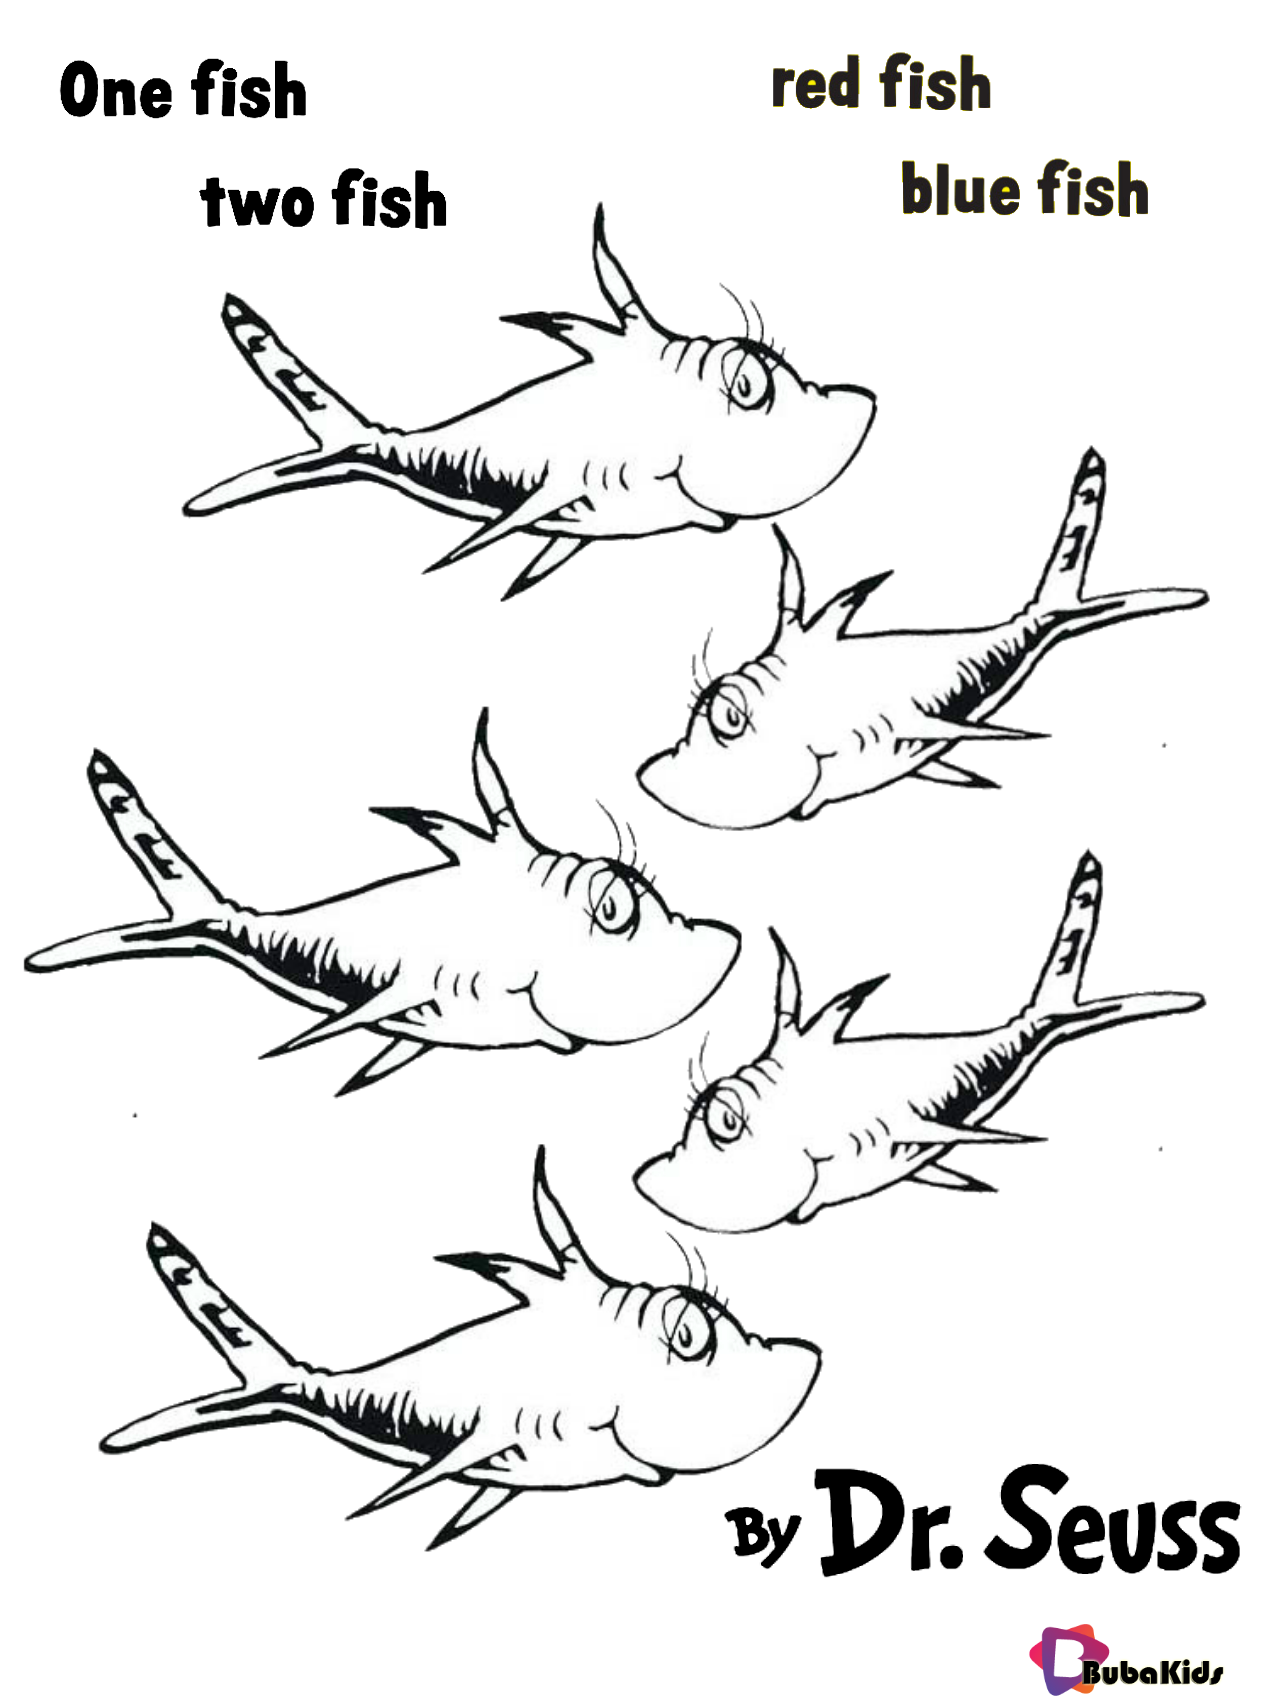 Dr seuss one fish two fish red fish blue fish coloring pages bubakids fish coloring page one fish one fish two fish